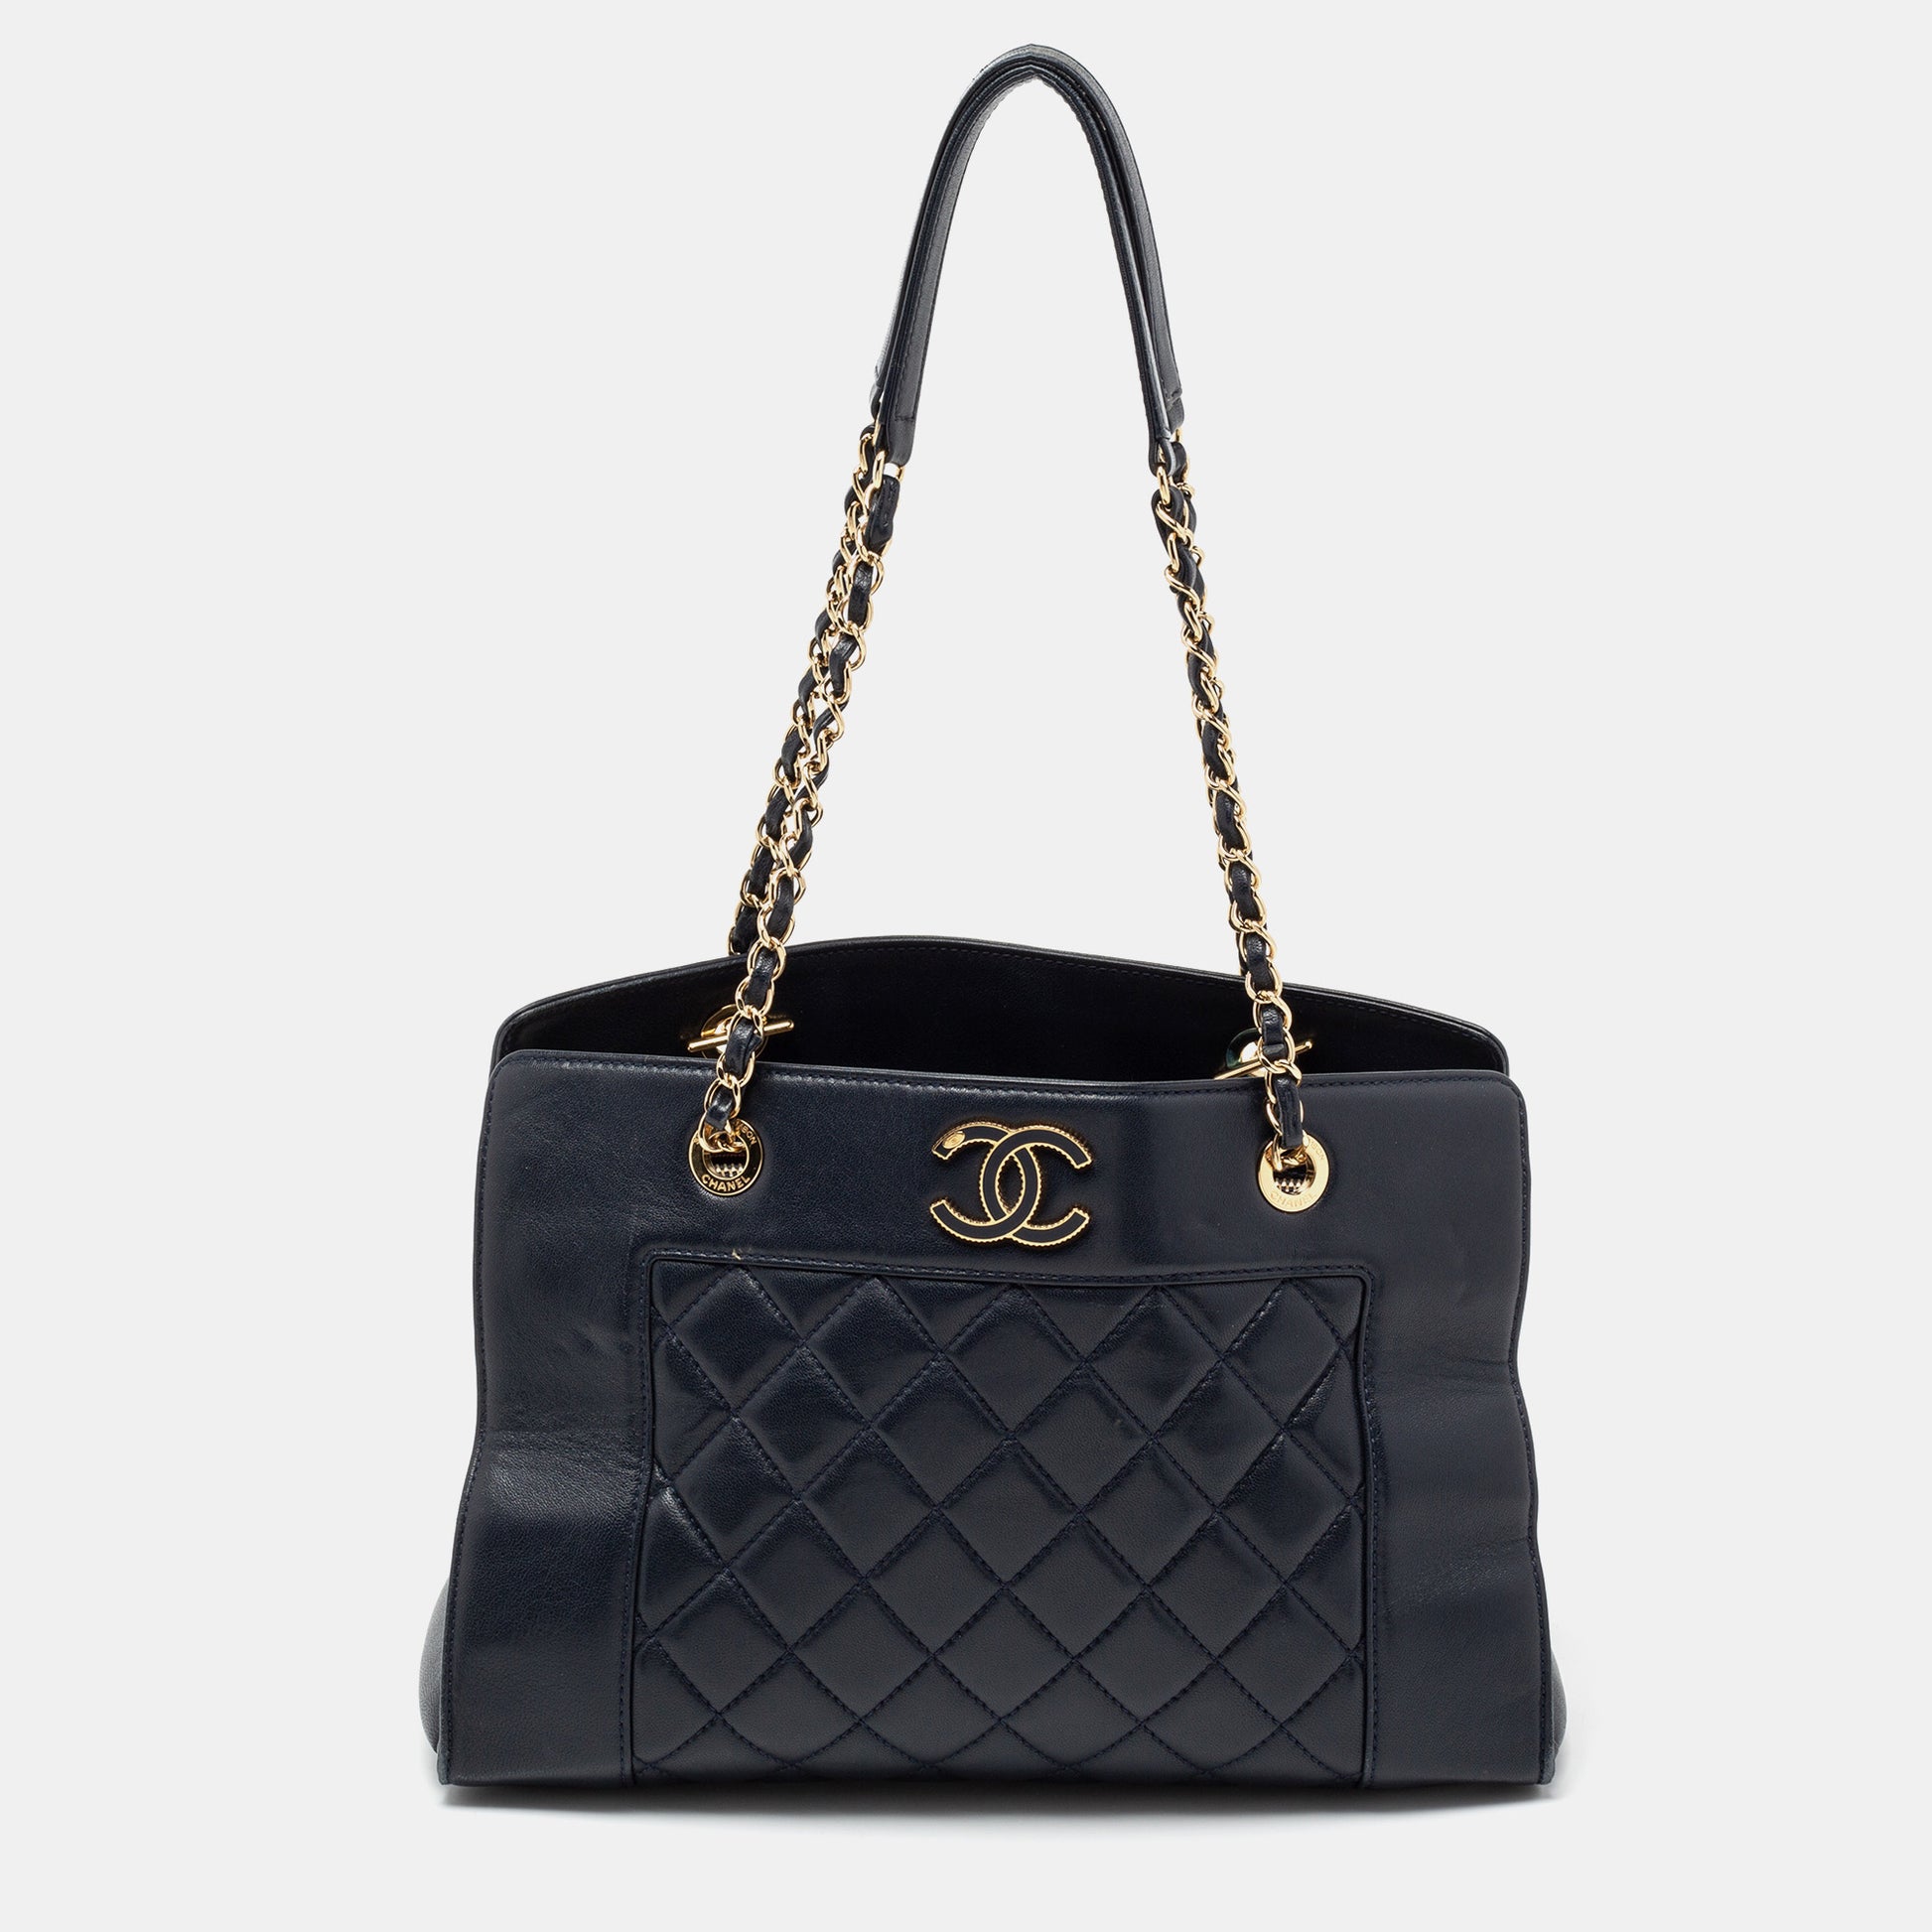 Chanel Blue Quilted Leather Large Shopper Tote